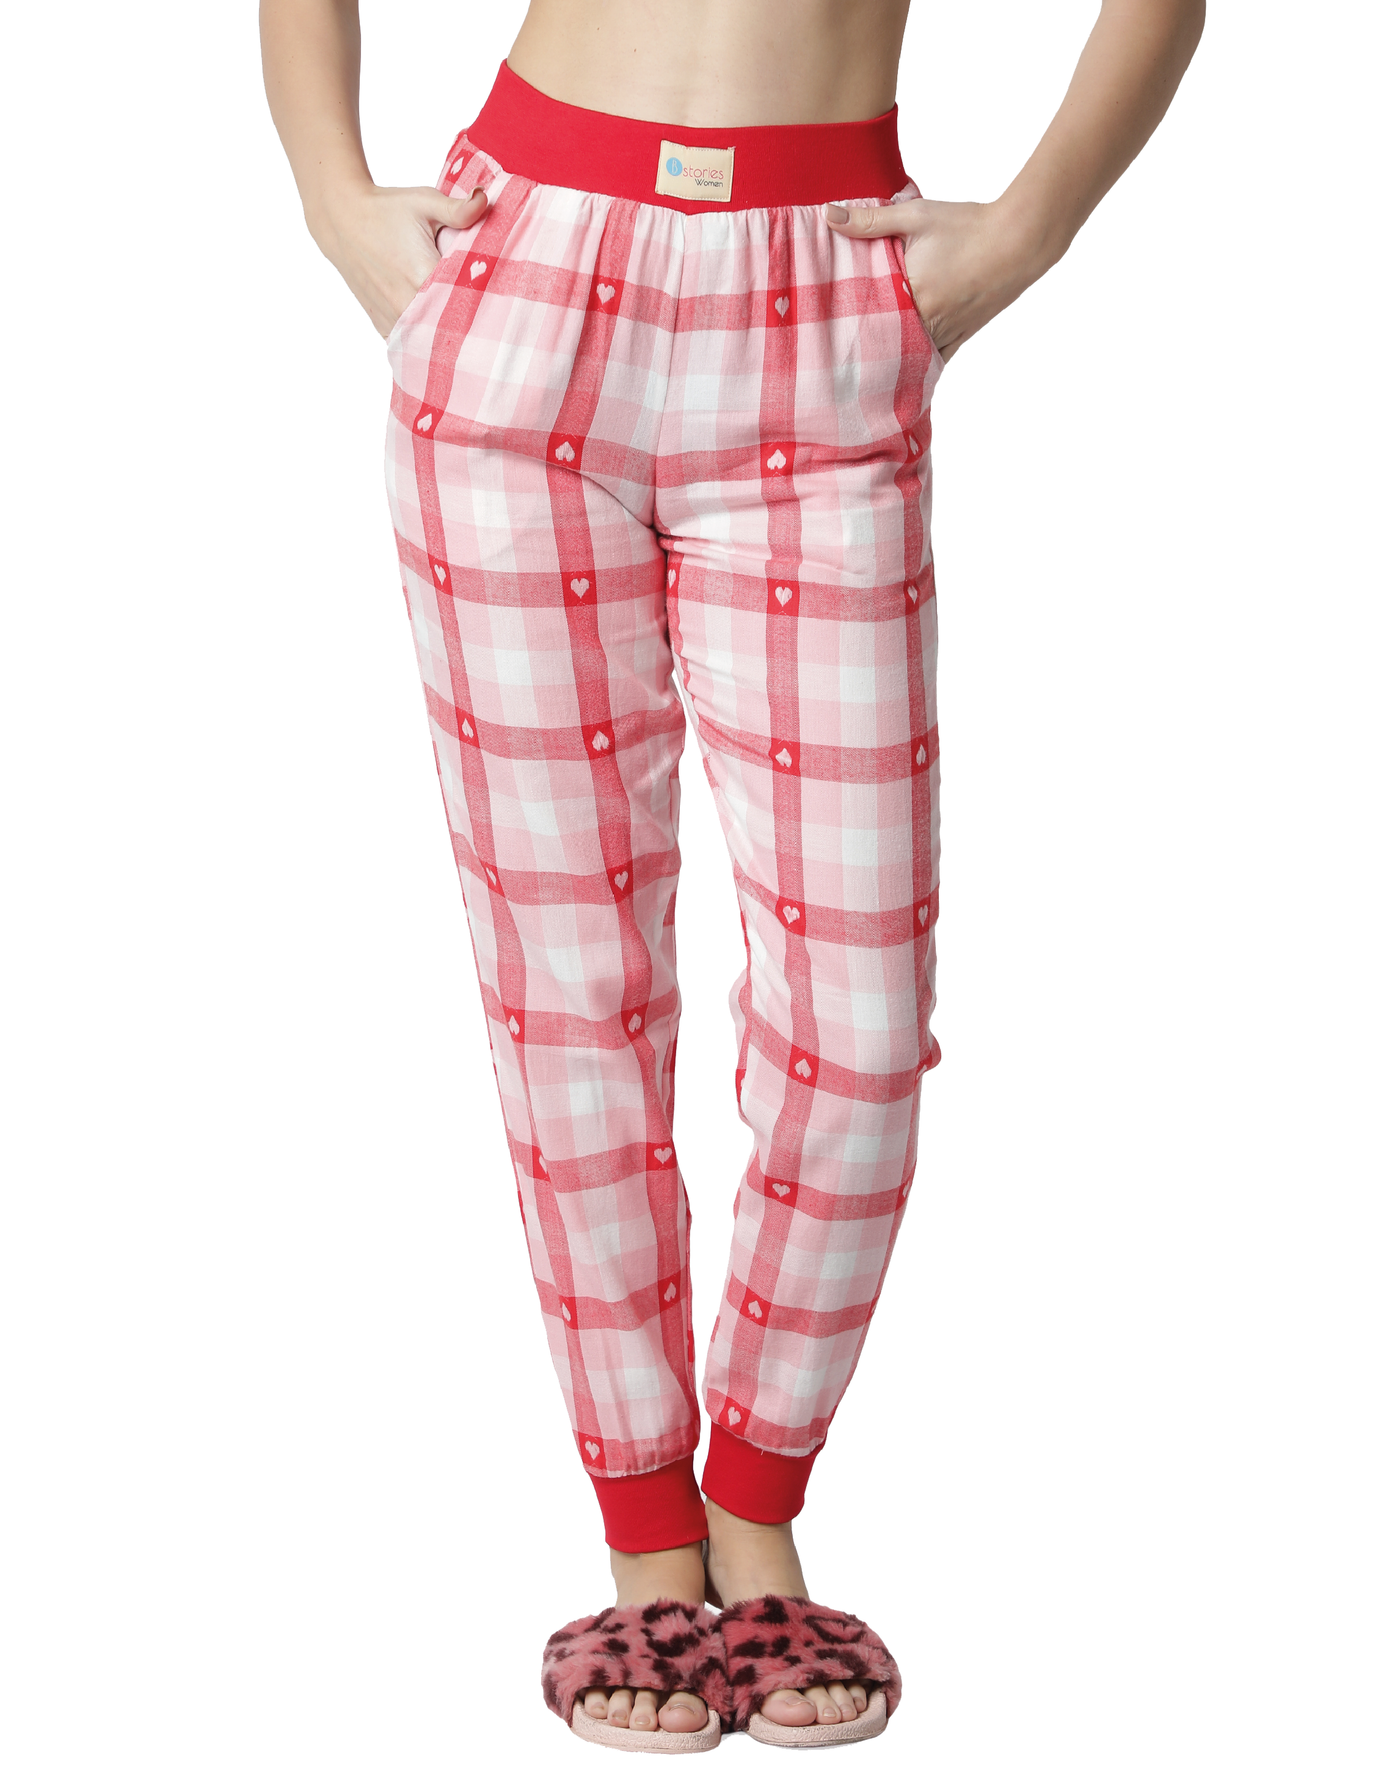 Lounge Pant for Women-Pink Heart Checked Jogger